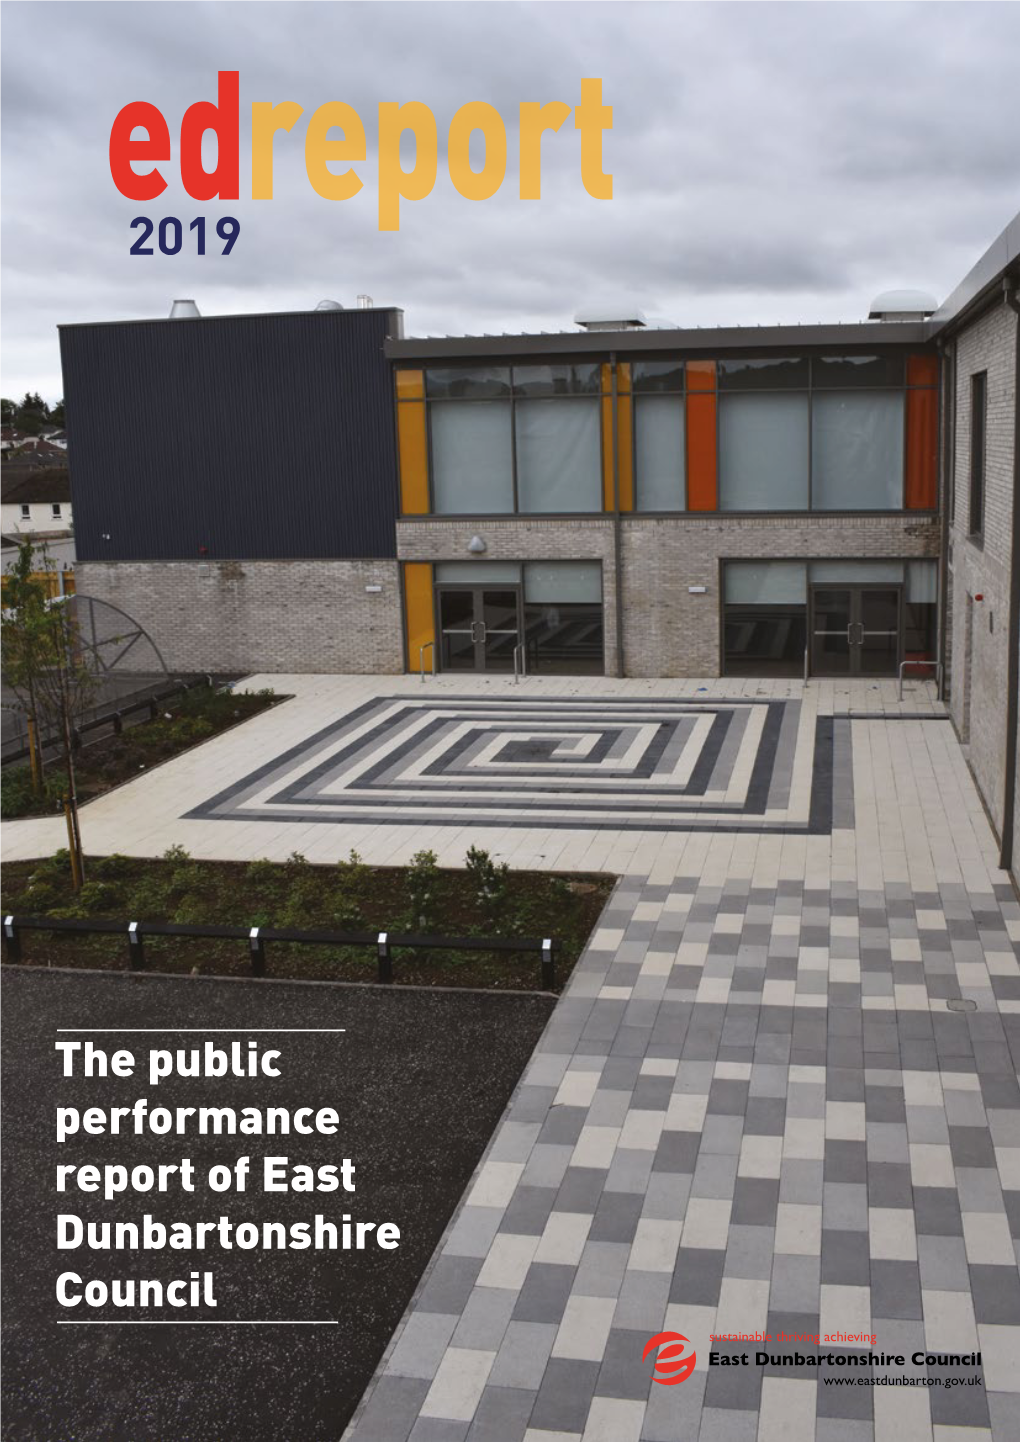 The Public Performance Report of East Dunbartonshire Council